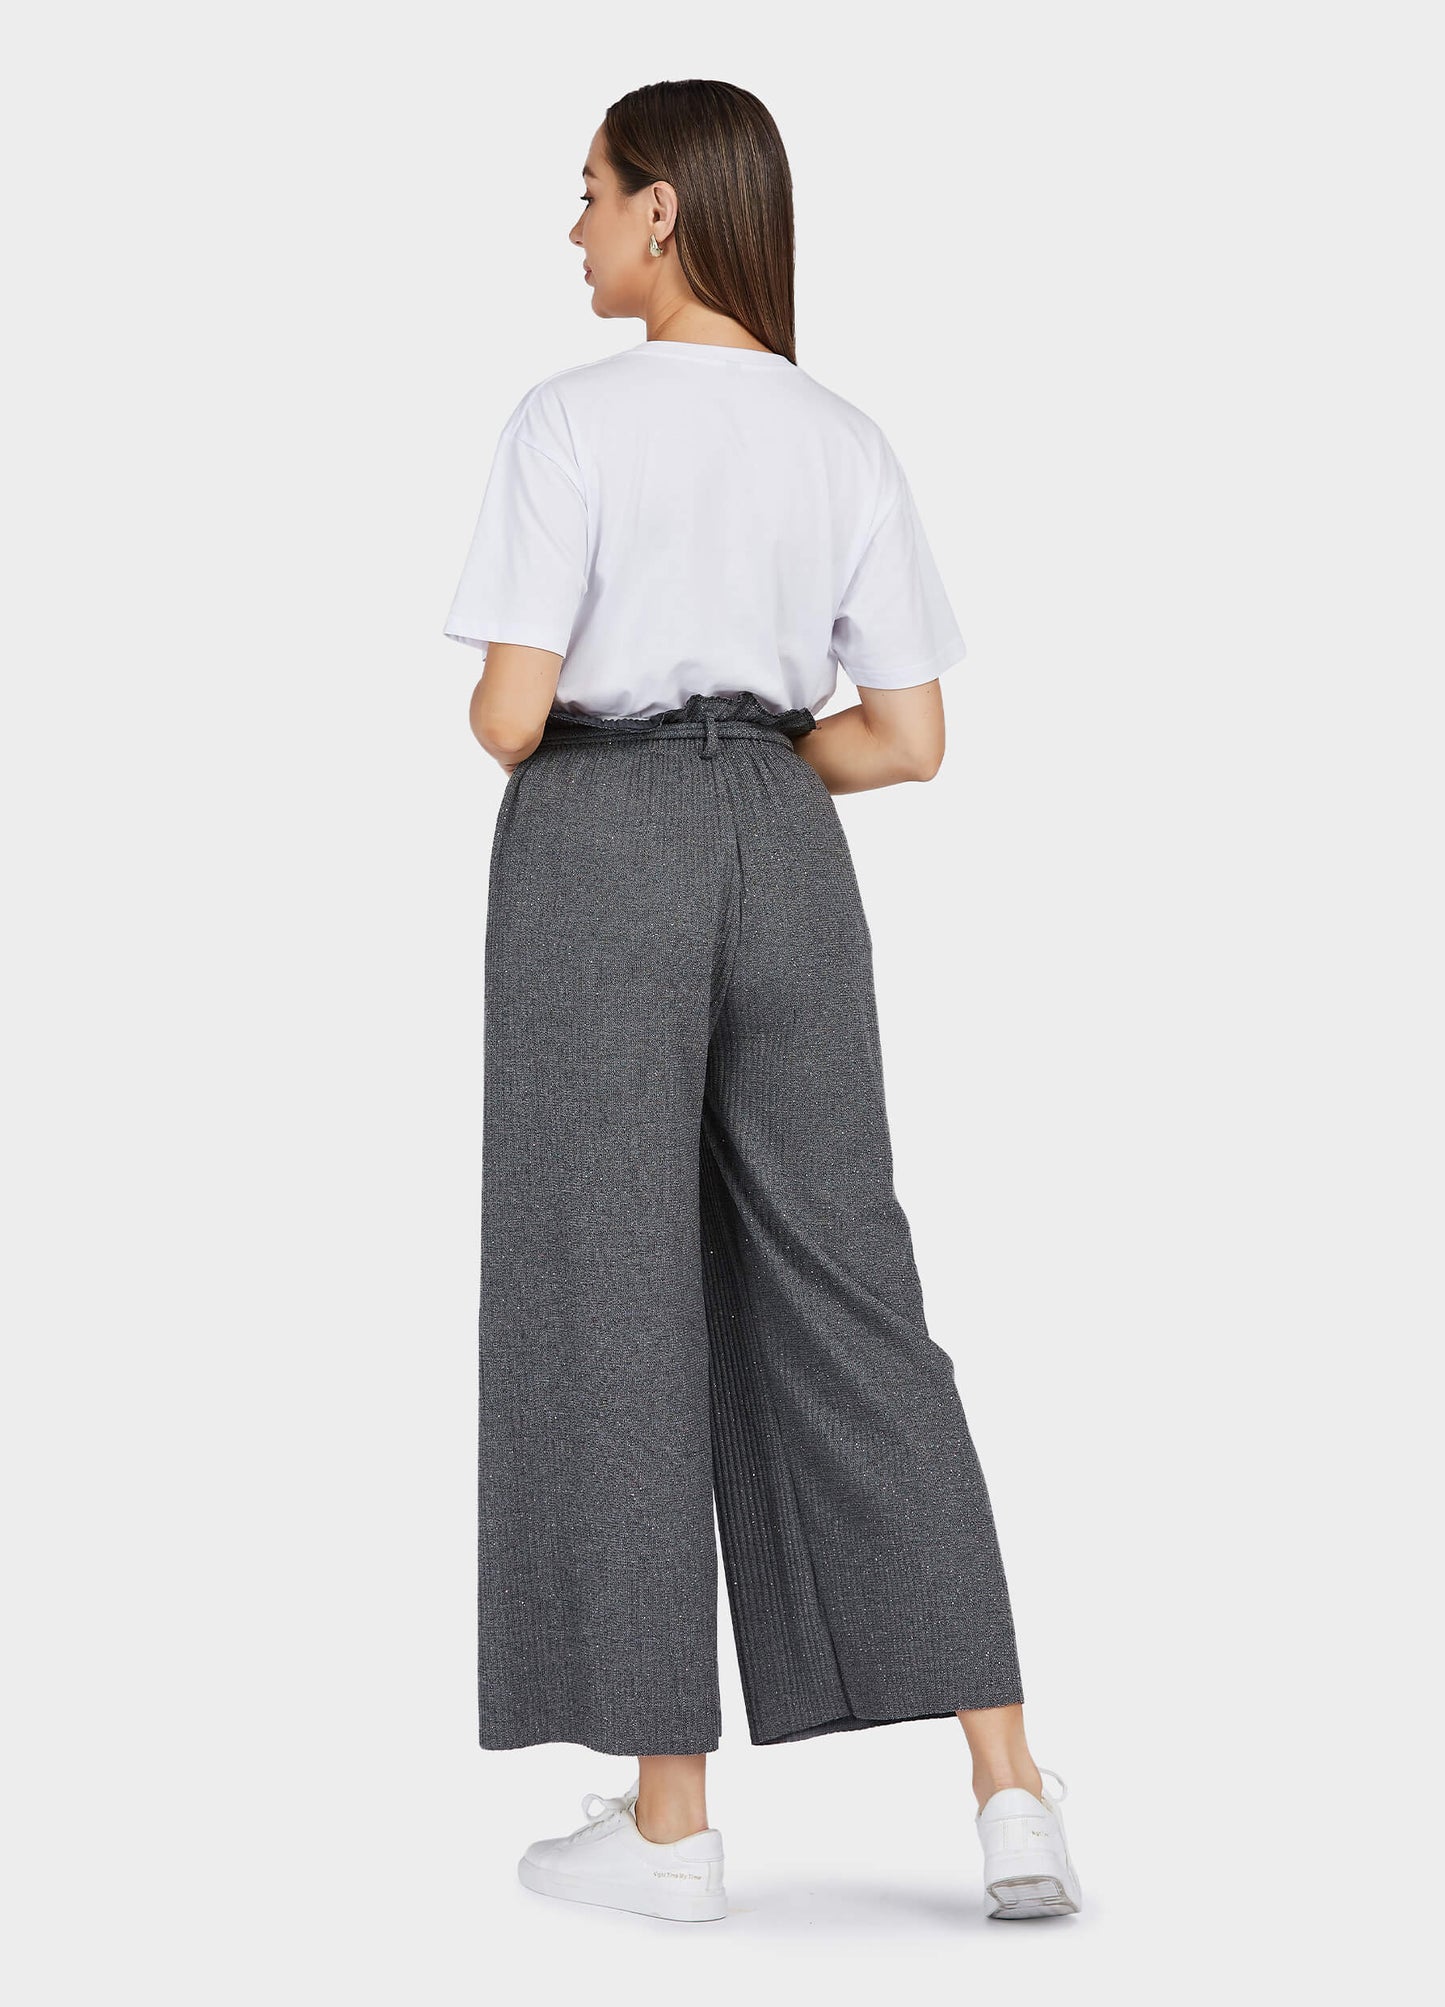 Women's Ruffle Trims Belted Comfort Wide Leg Trousers-Grey back view